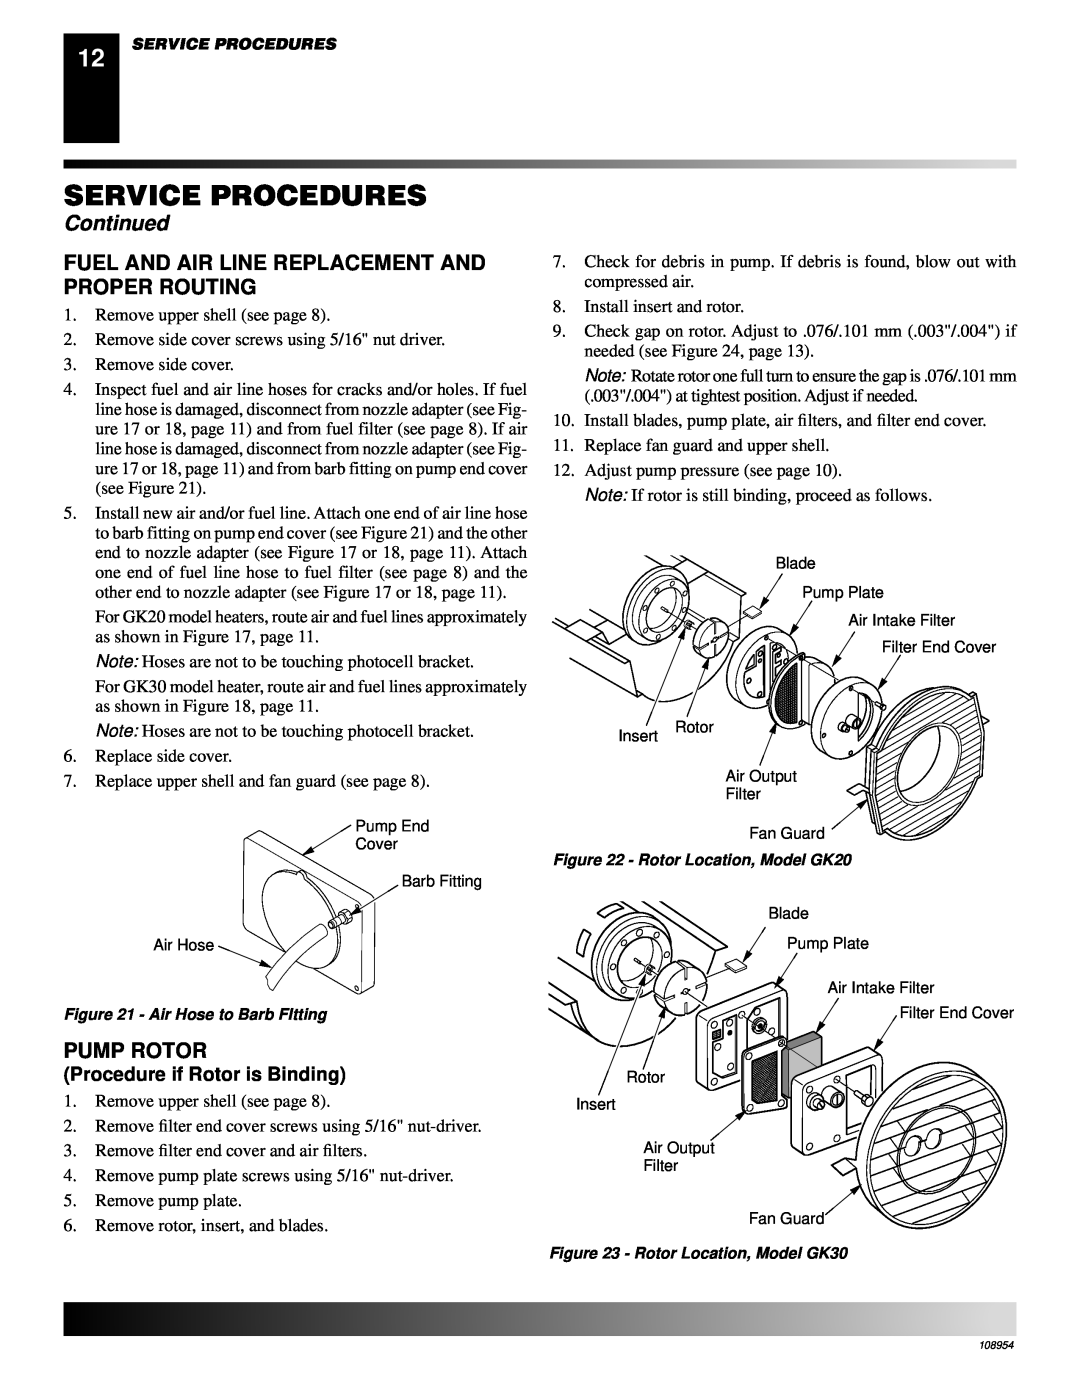 Desa GK20 Fuel And Air Line Replacement And Proper Routing, Pump Rotor, Procedure if Rotor is Binding, Service Procedures 